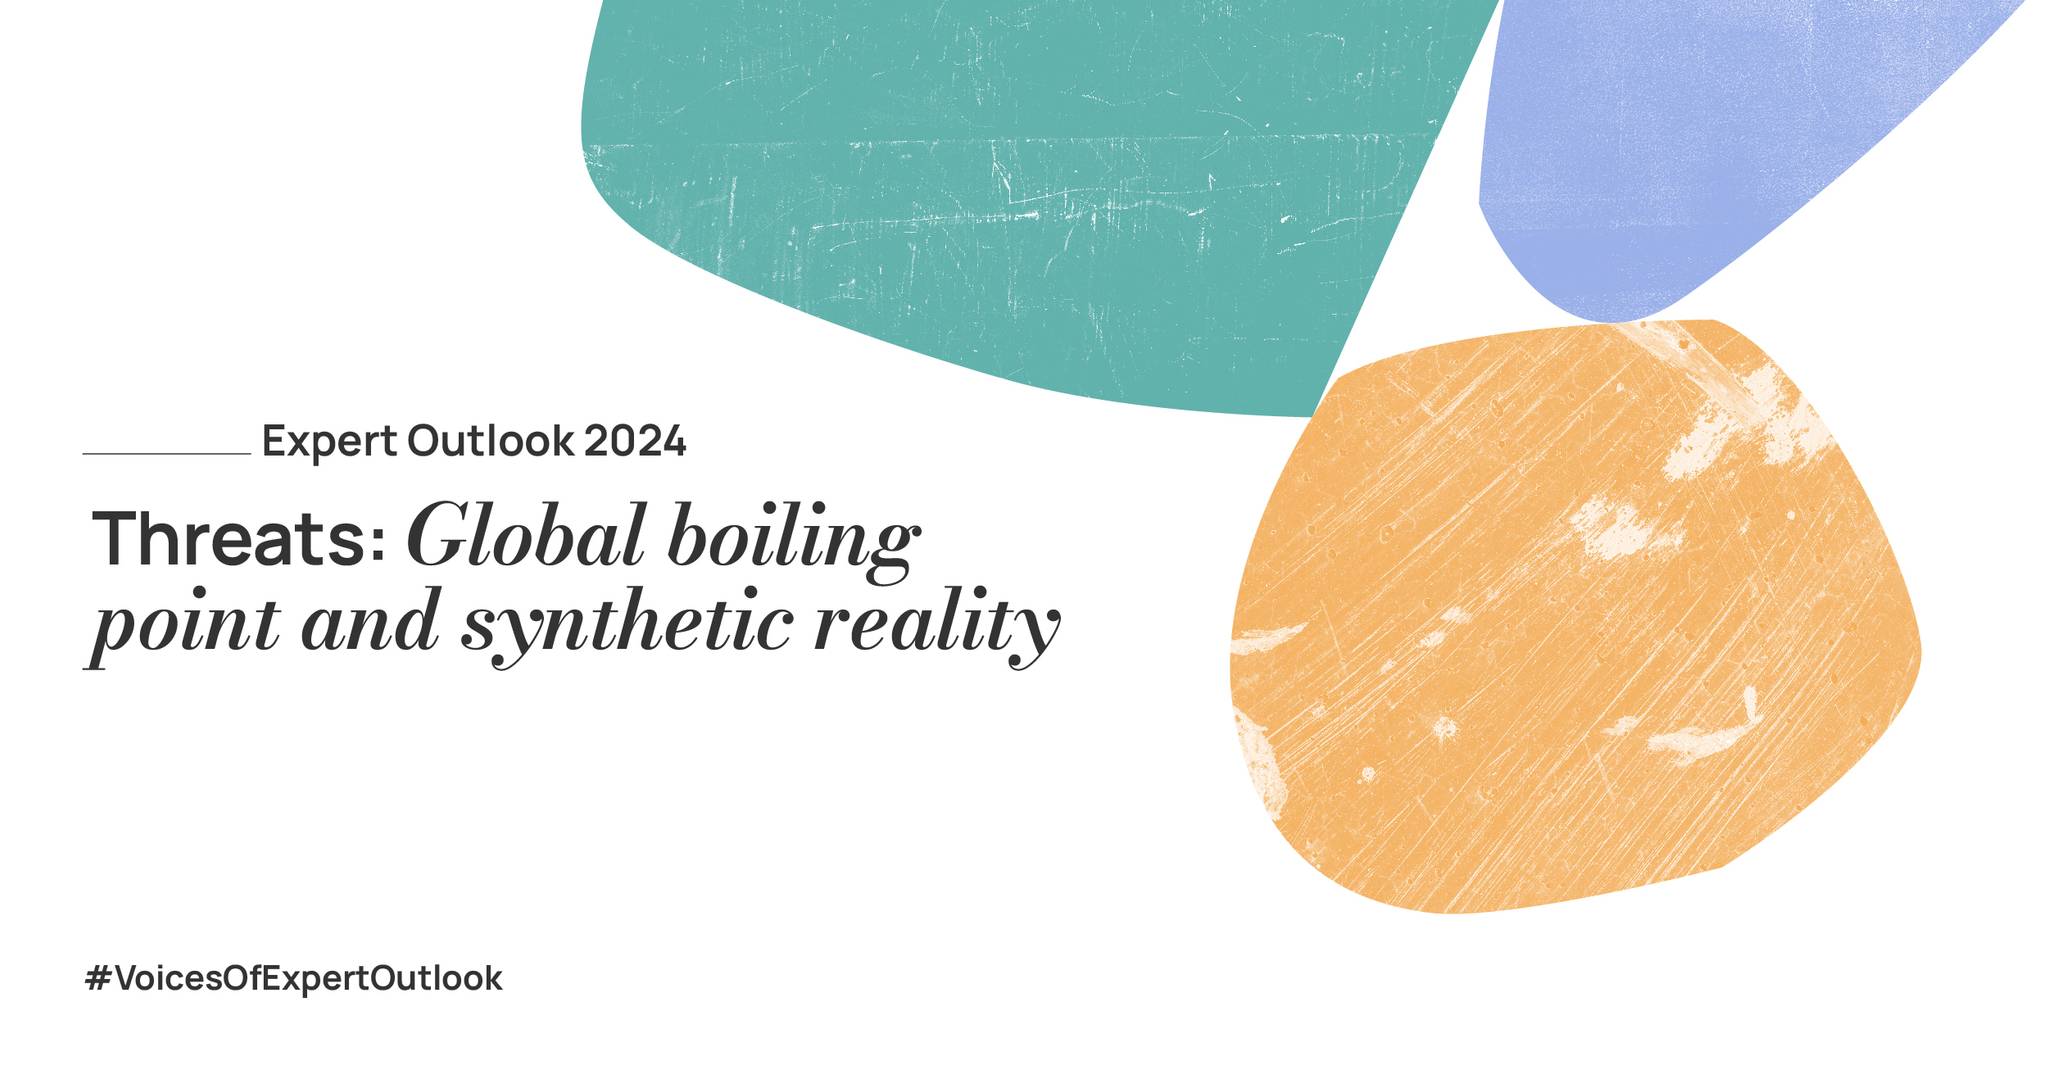 Global boiling point and synthetic reality